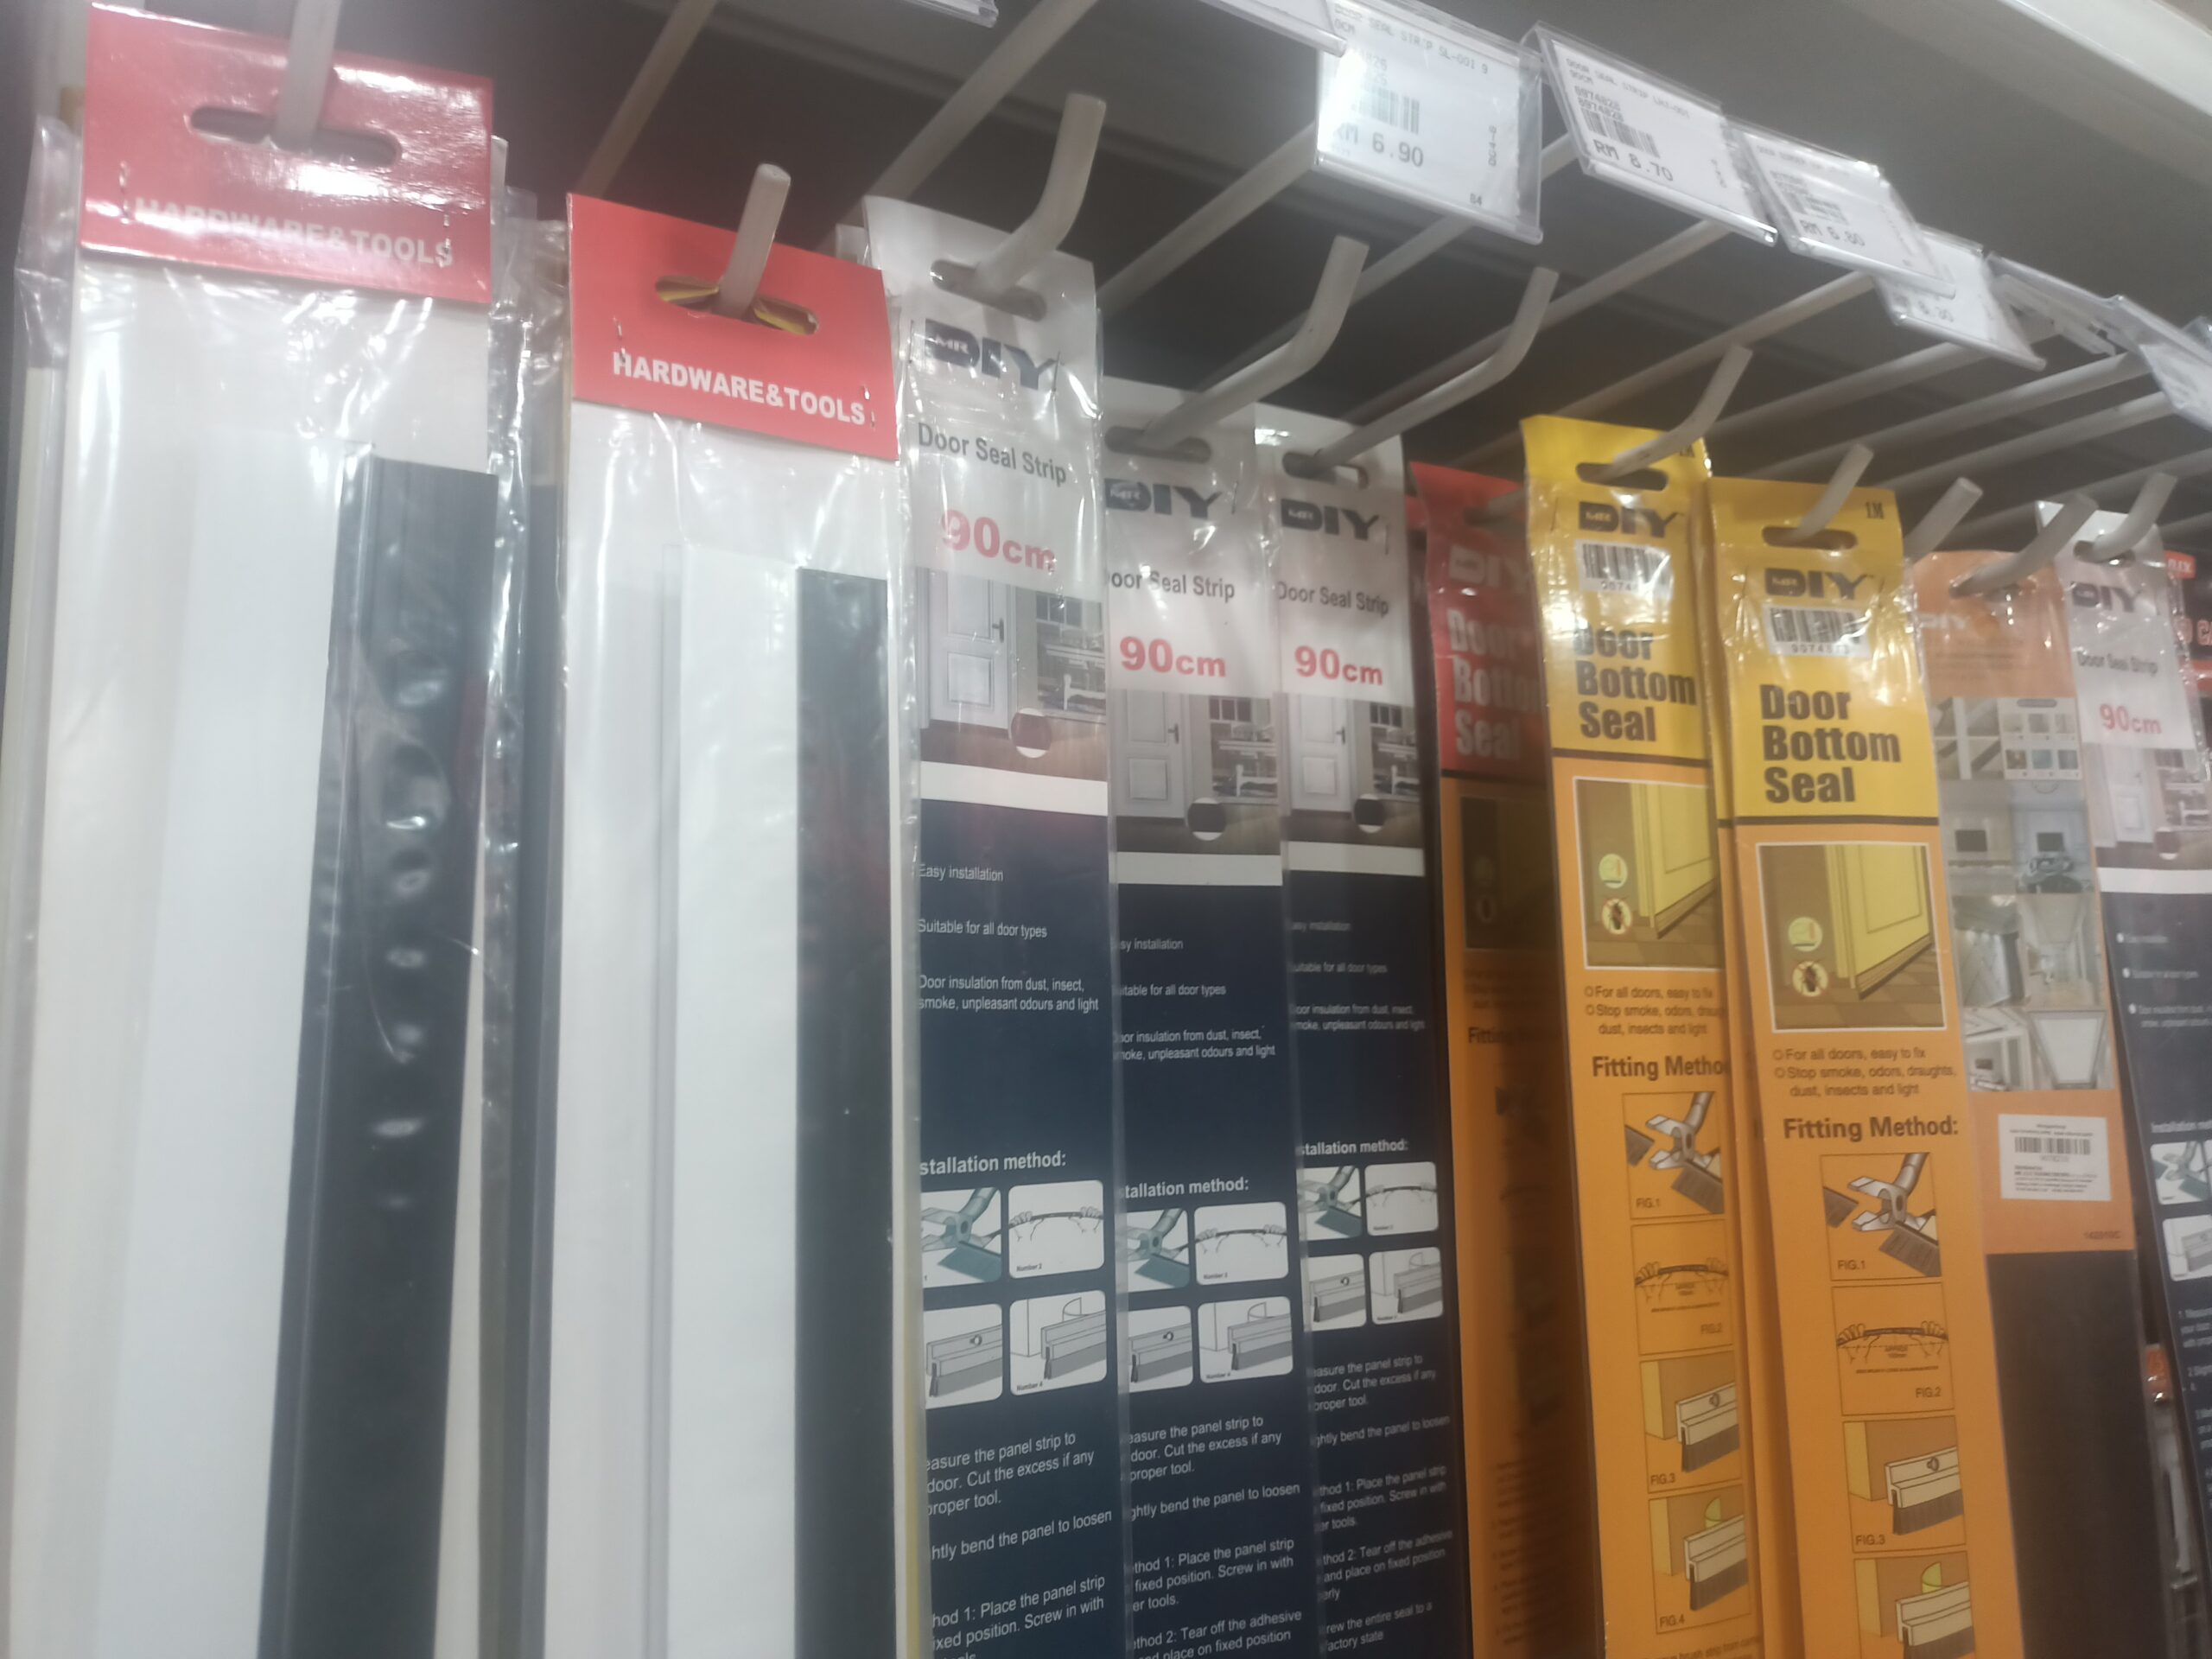 Door noise reducers for sale in a hardware store